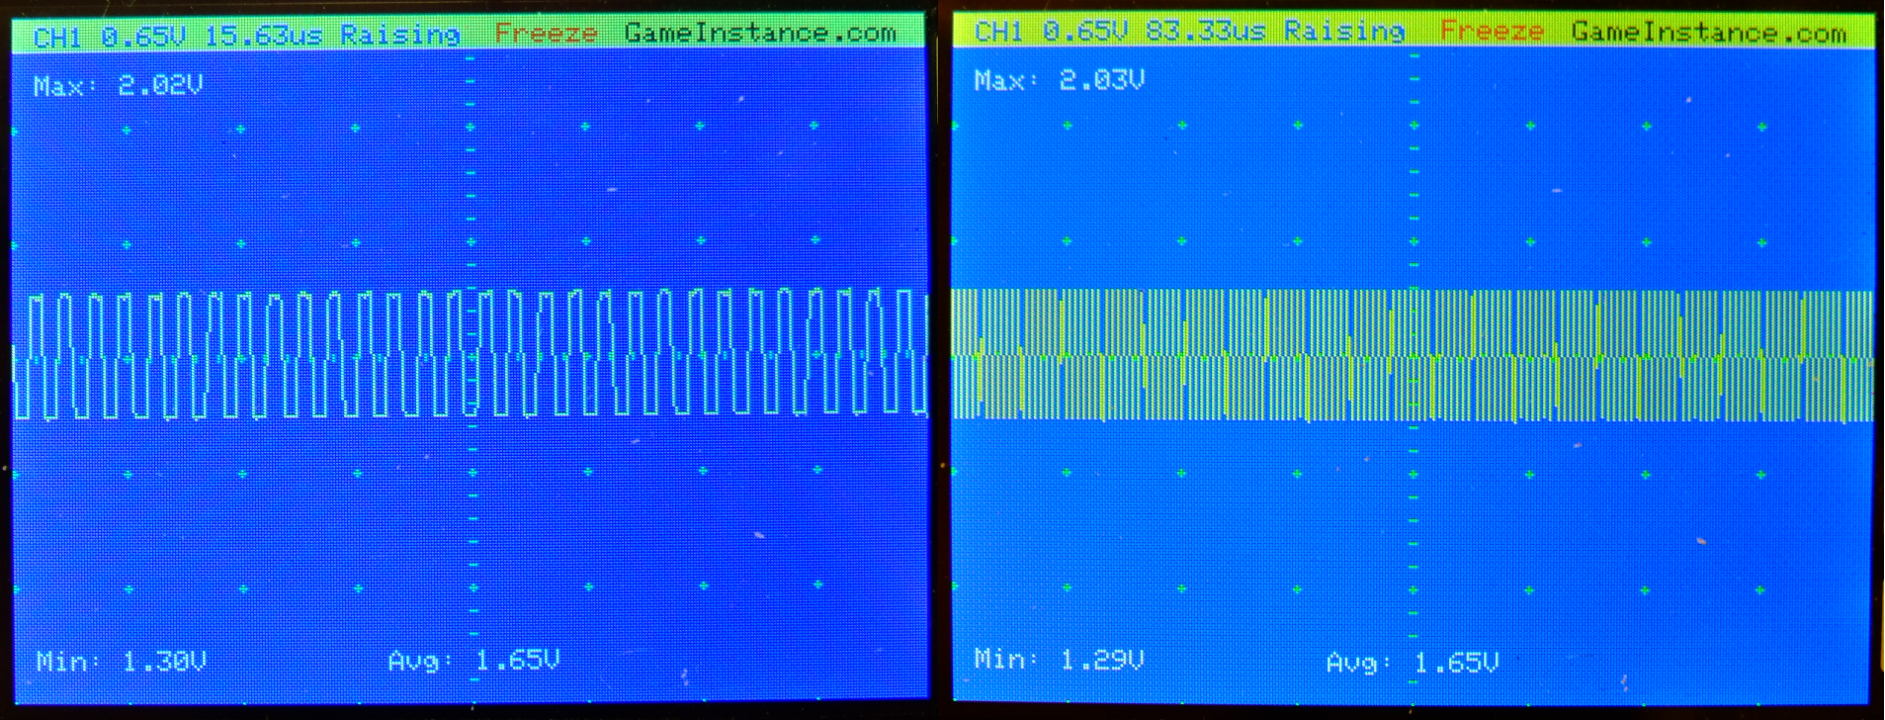 STM32 Oscilloscope - 250 kHz square signal 50% duty cycle. A 20 mV error was observed at different sampling rates. Left - sampled at 2.57 MSPS. Right - sampled at 529 kSPS.